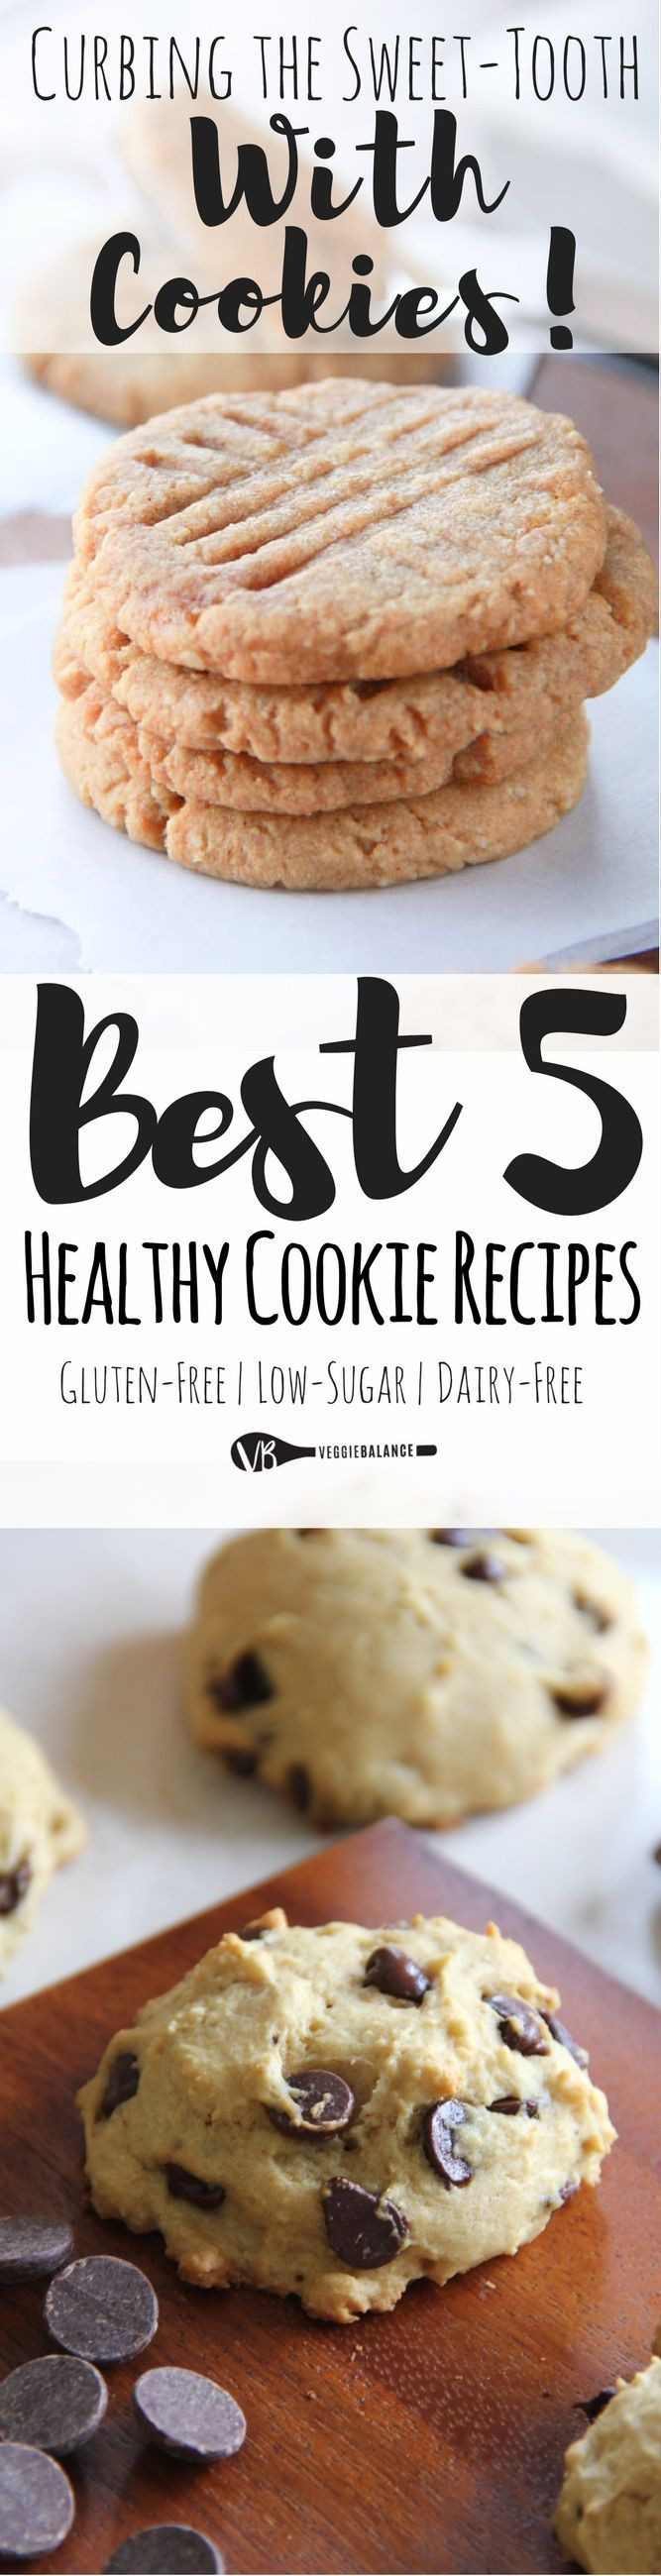 Healthy Gluten Free Cookie Recipes
 1000 ideas about Healthy Cookies on Pinterest